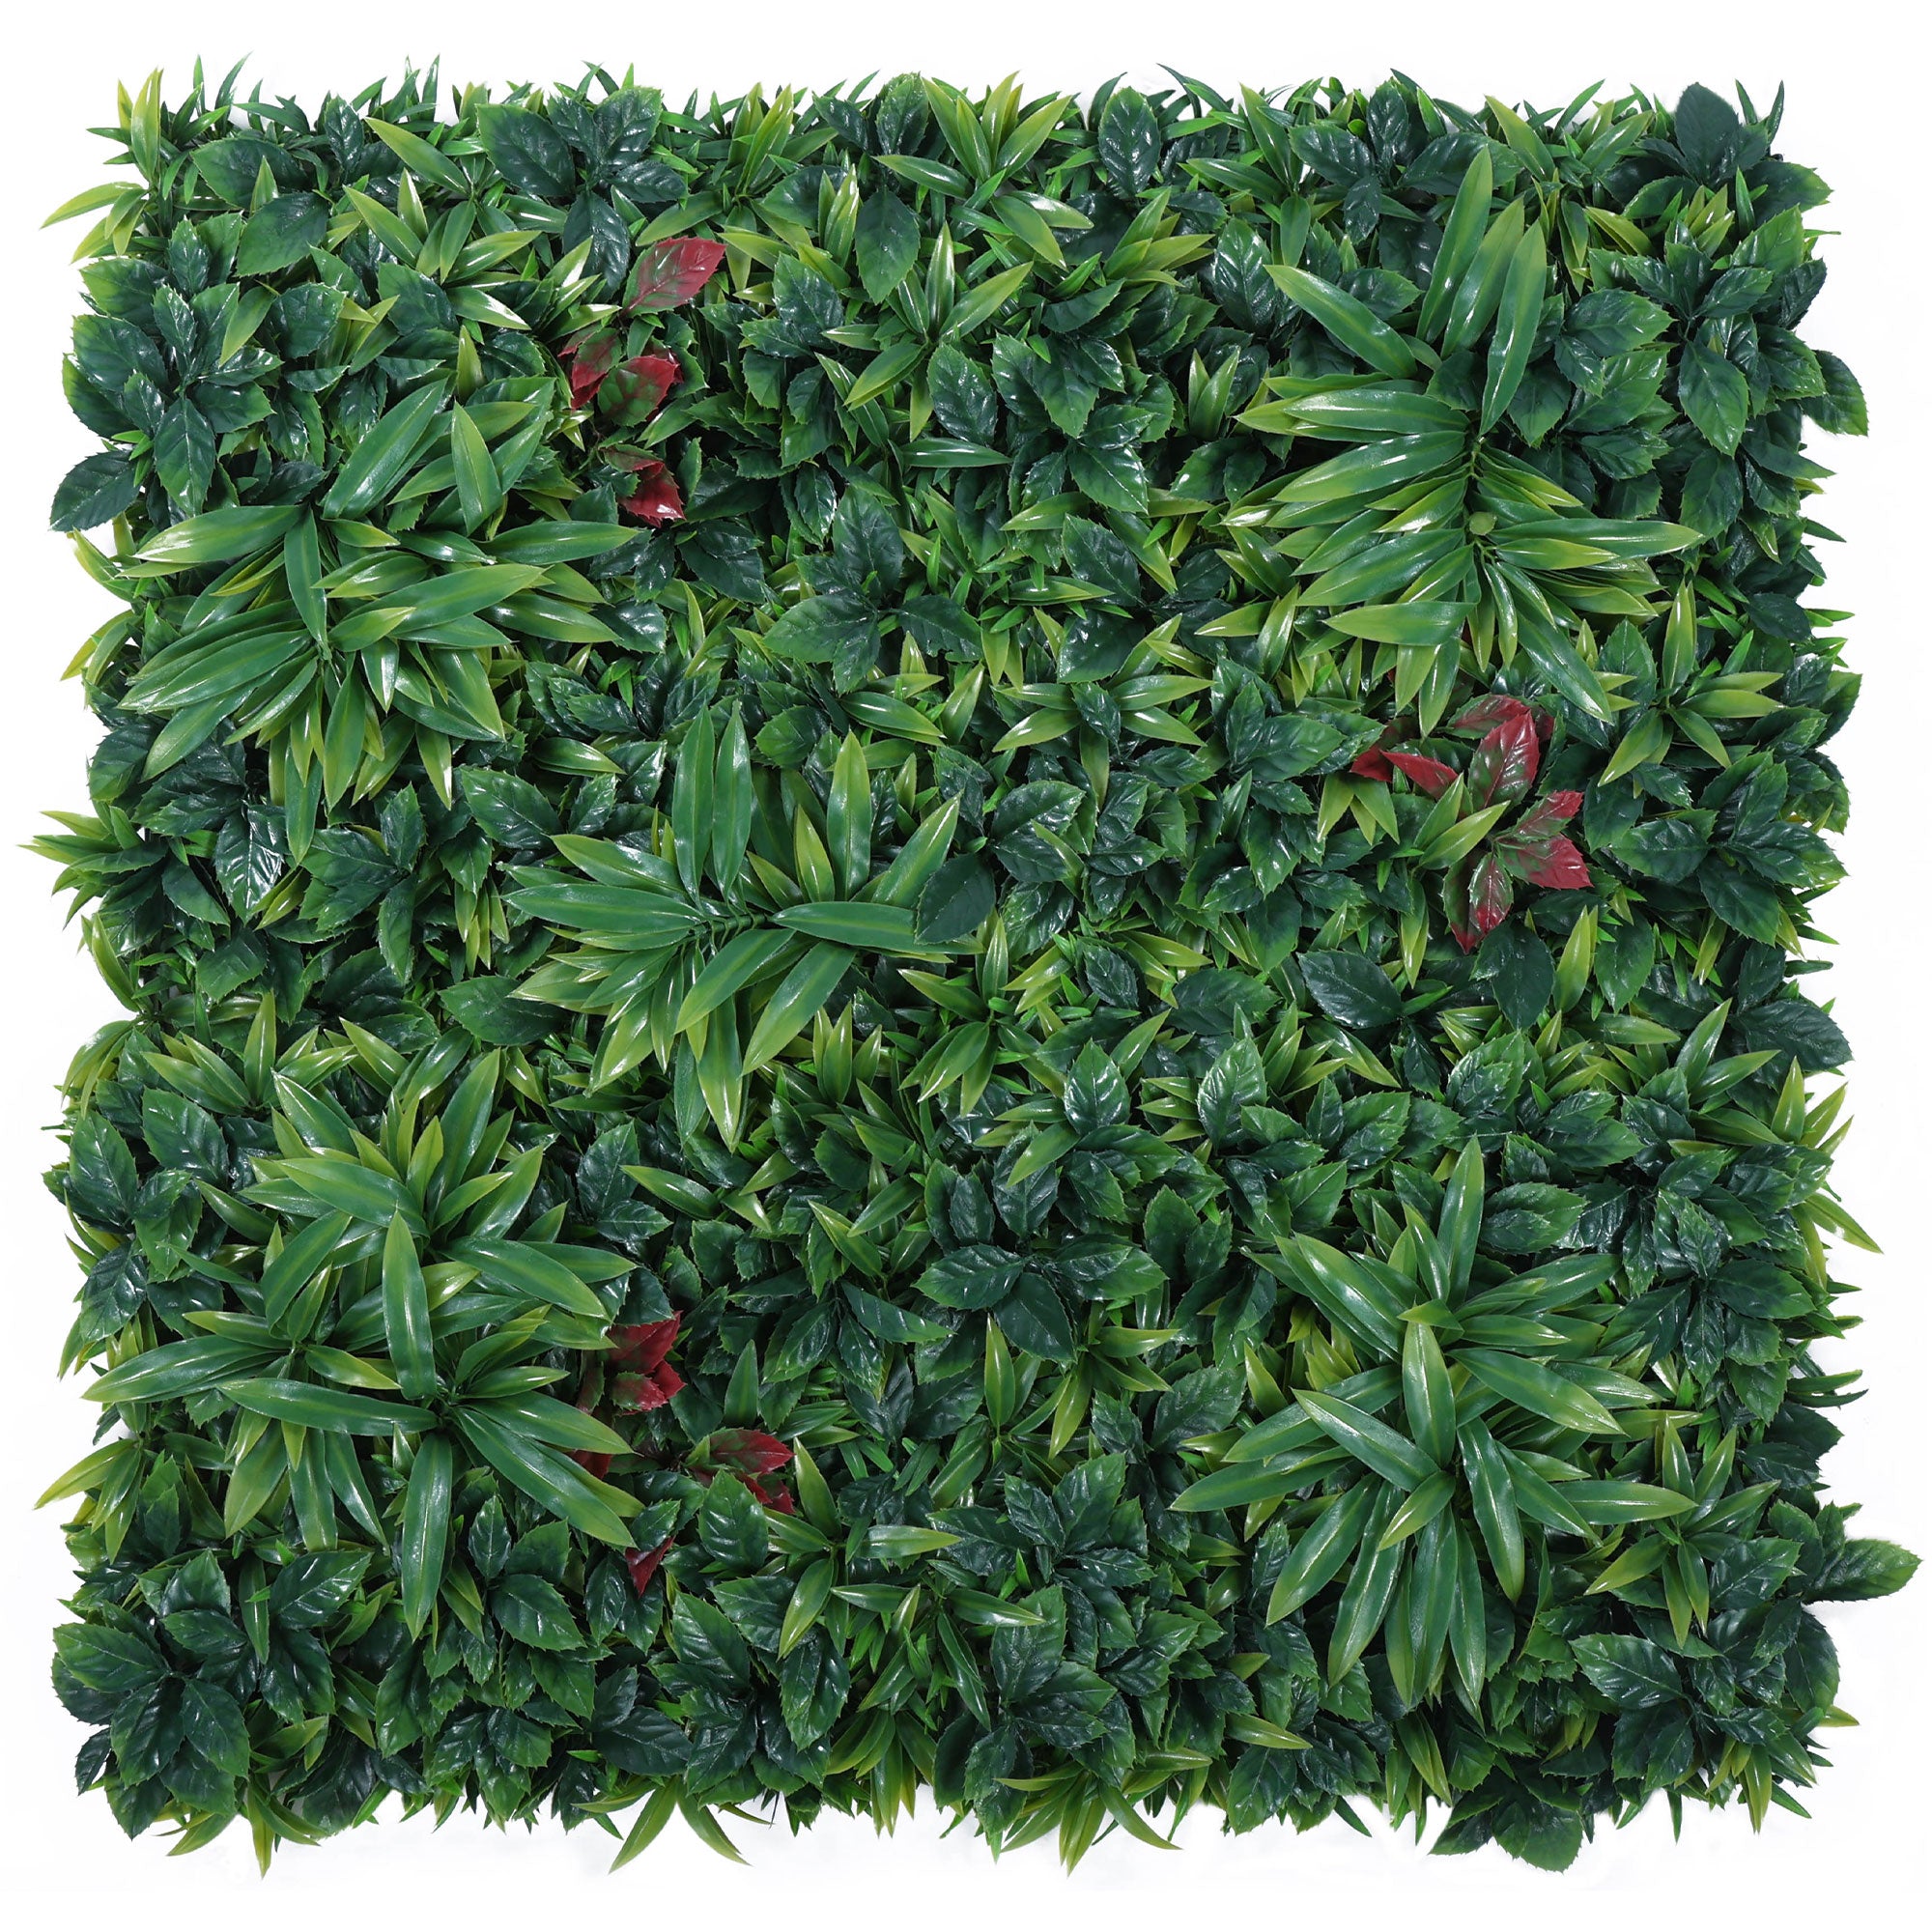 Red and Green Mix Leaves Vertical Garden Wall Tile (Size: 100cm x 100cm, Pack of 1)